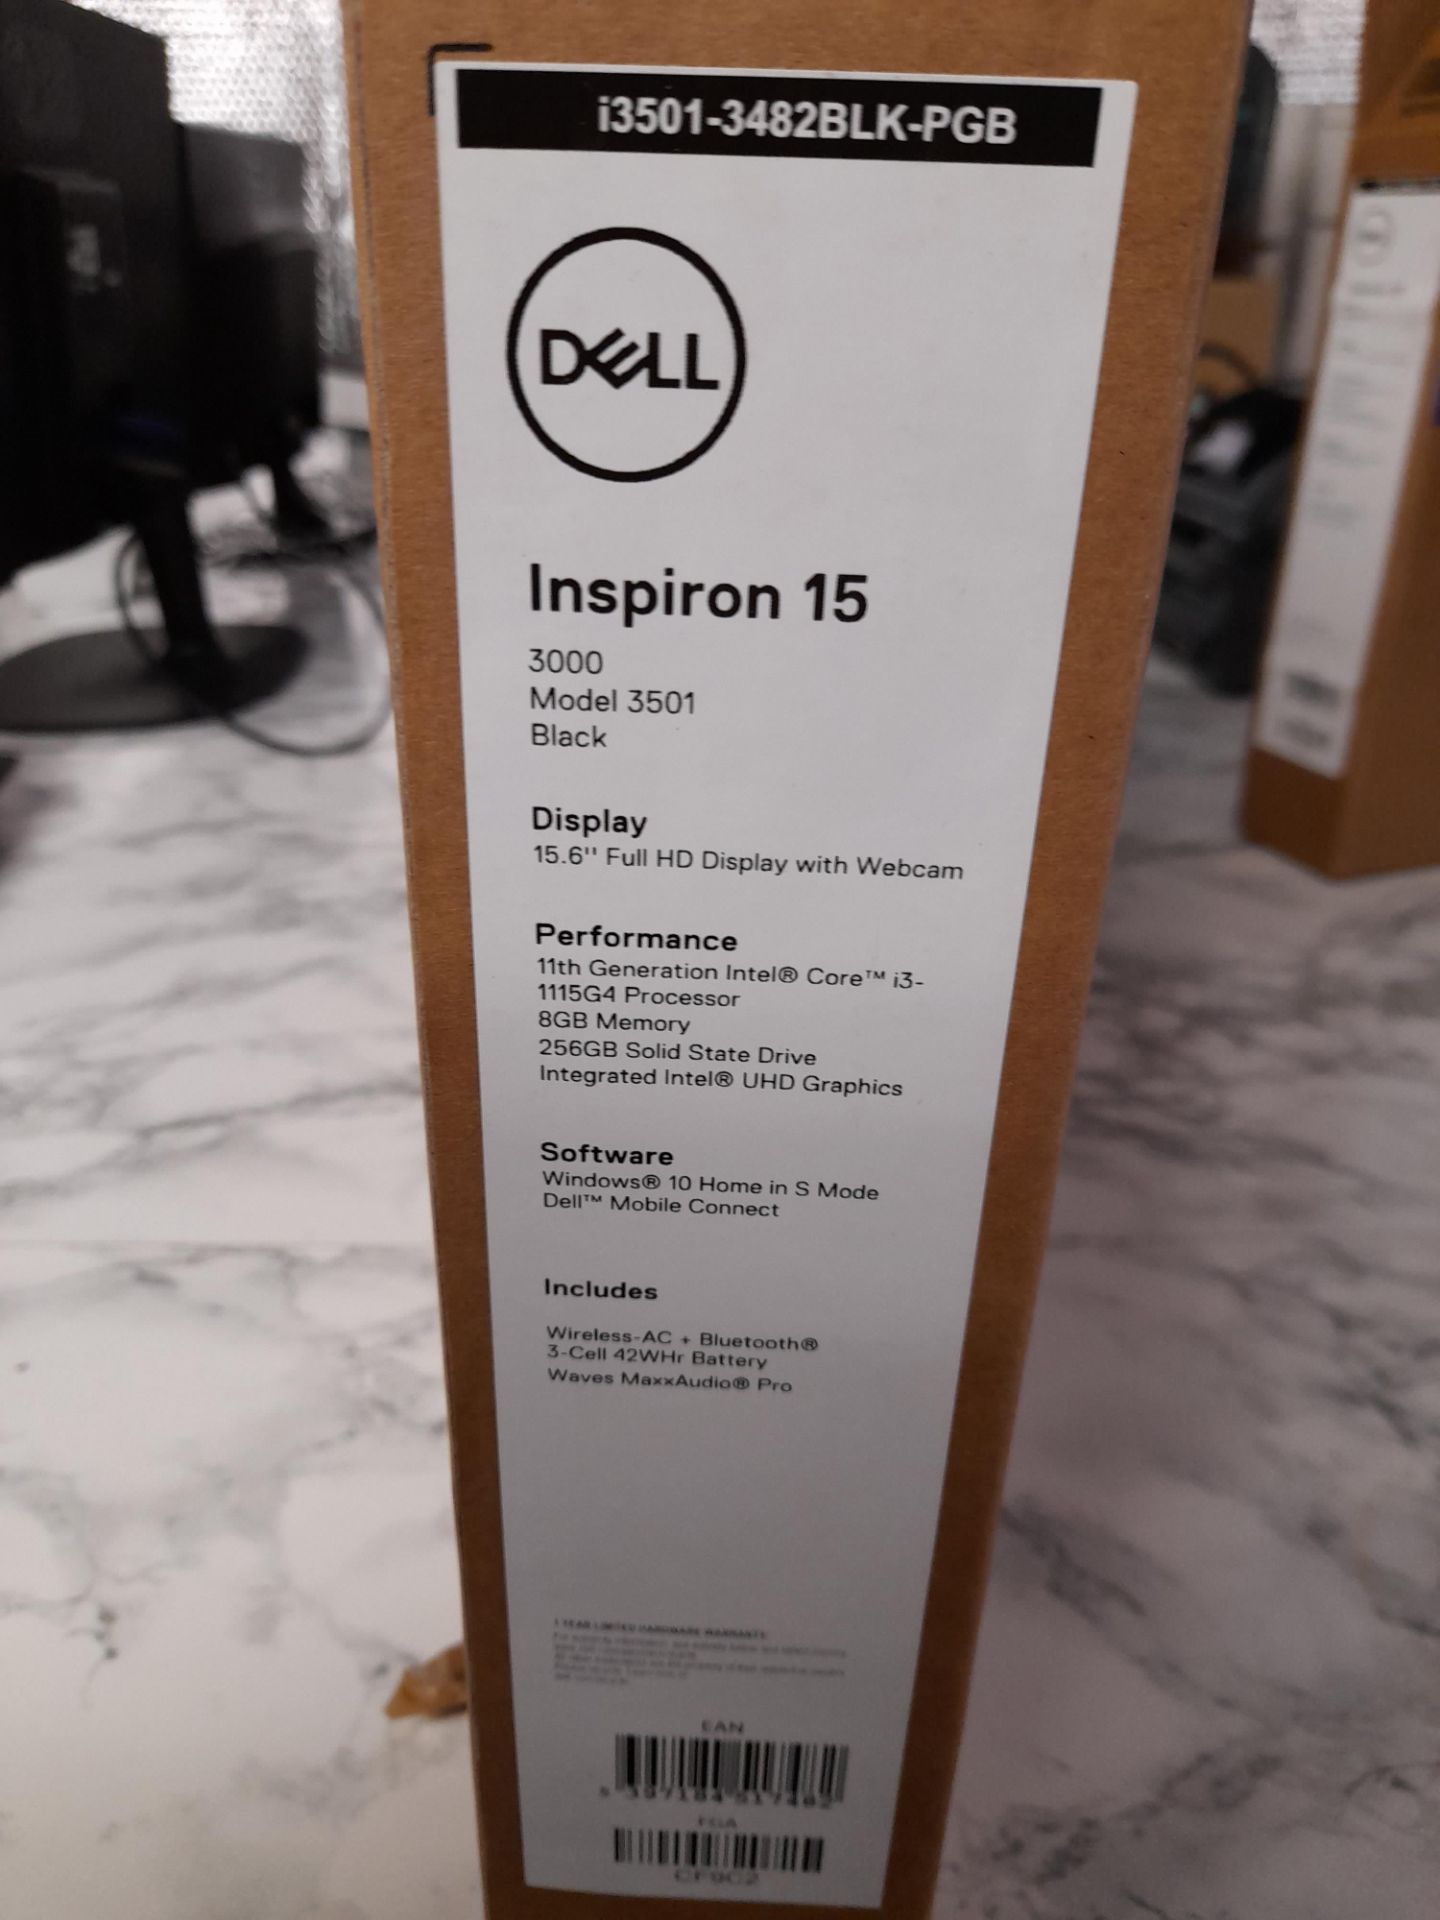 Dell Inspiron 15 3000 laptop, Model 3501, with Intel Core i3, with charger - Image 2 of 4